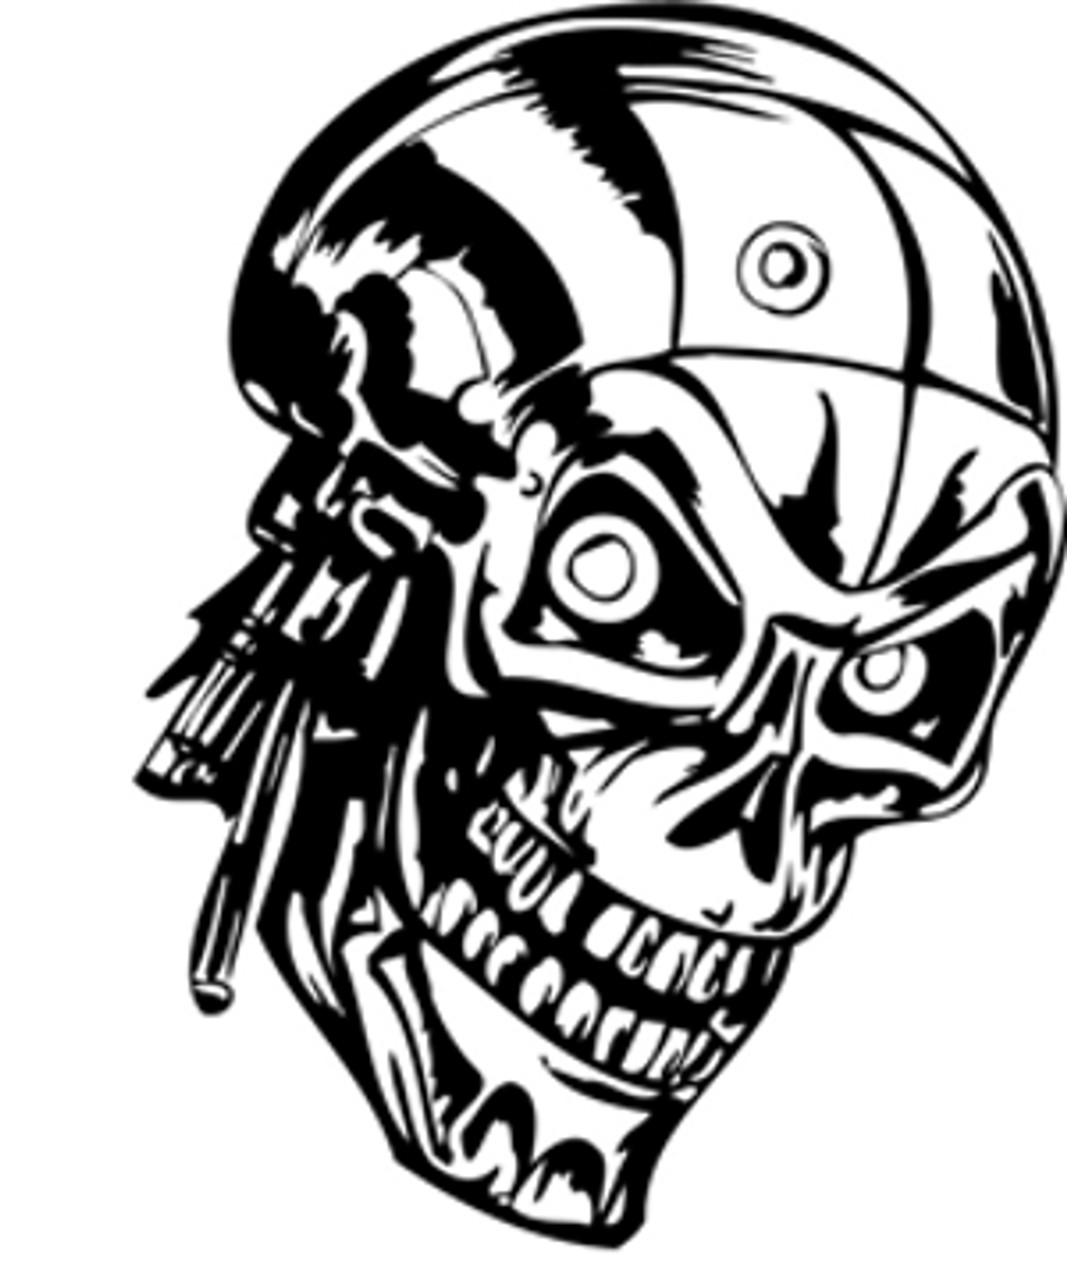 Free terminator clipart, Download Free terminator clipart png